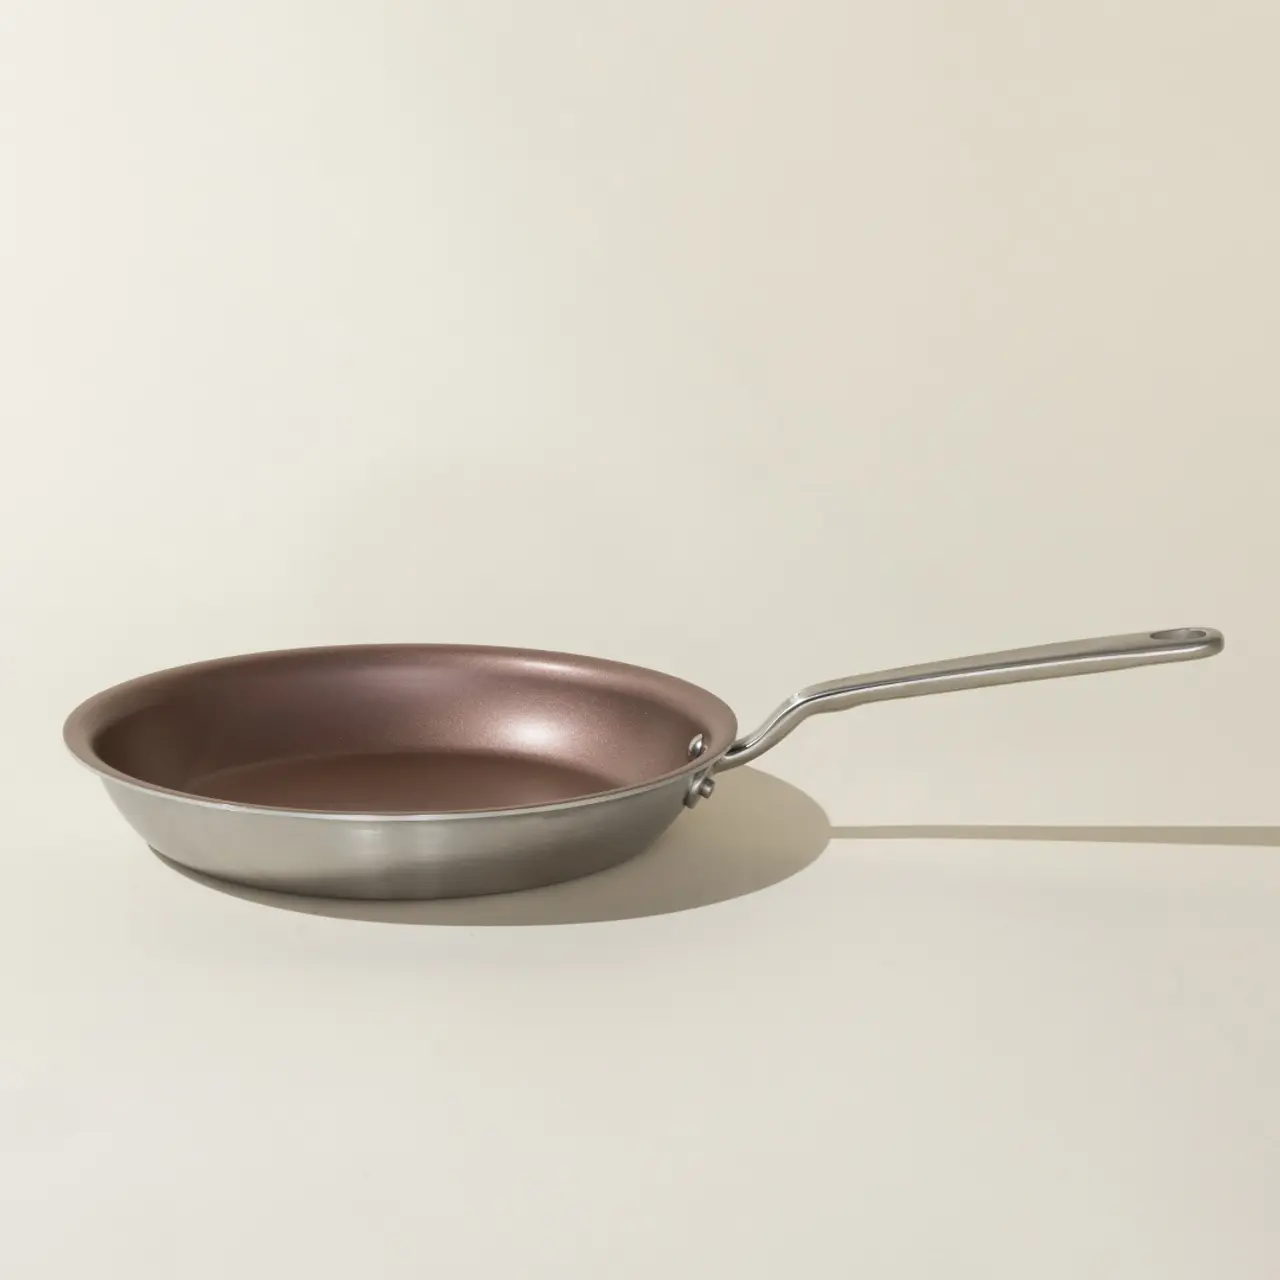 A stainless steel frying pan with a non-stick copper-colored interior and a long handle rests on a neutral background.